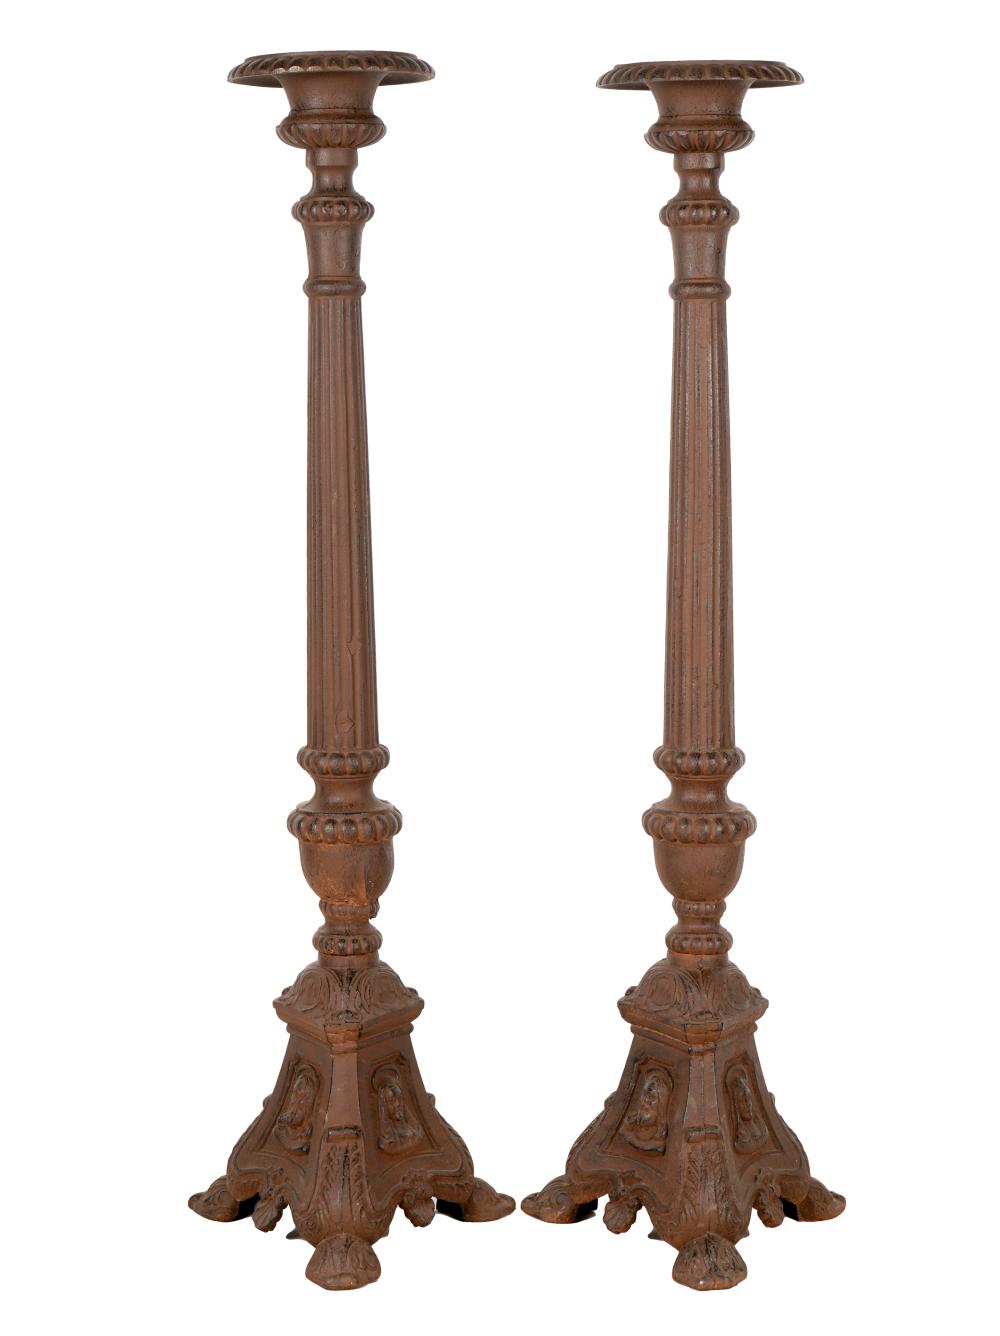 PAIR OF NEOCLASSICAL CAST IRON CANDLE